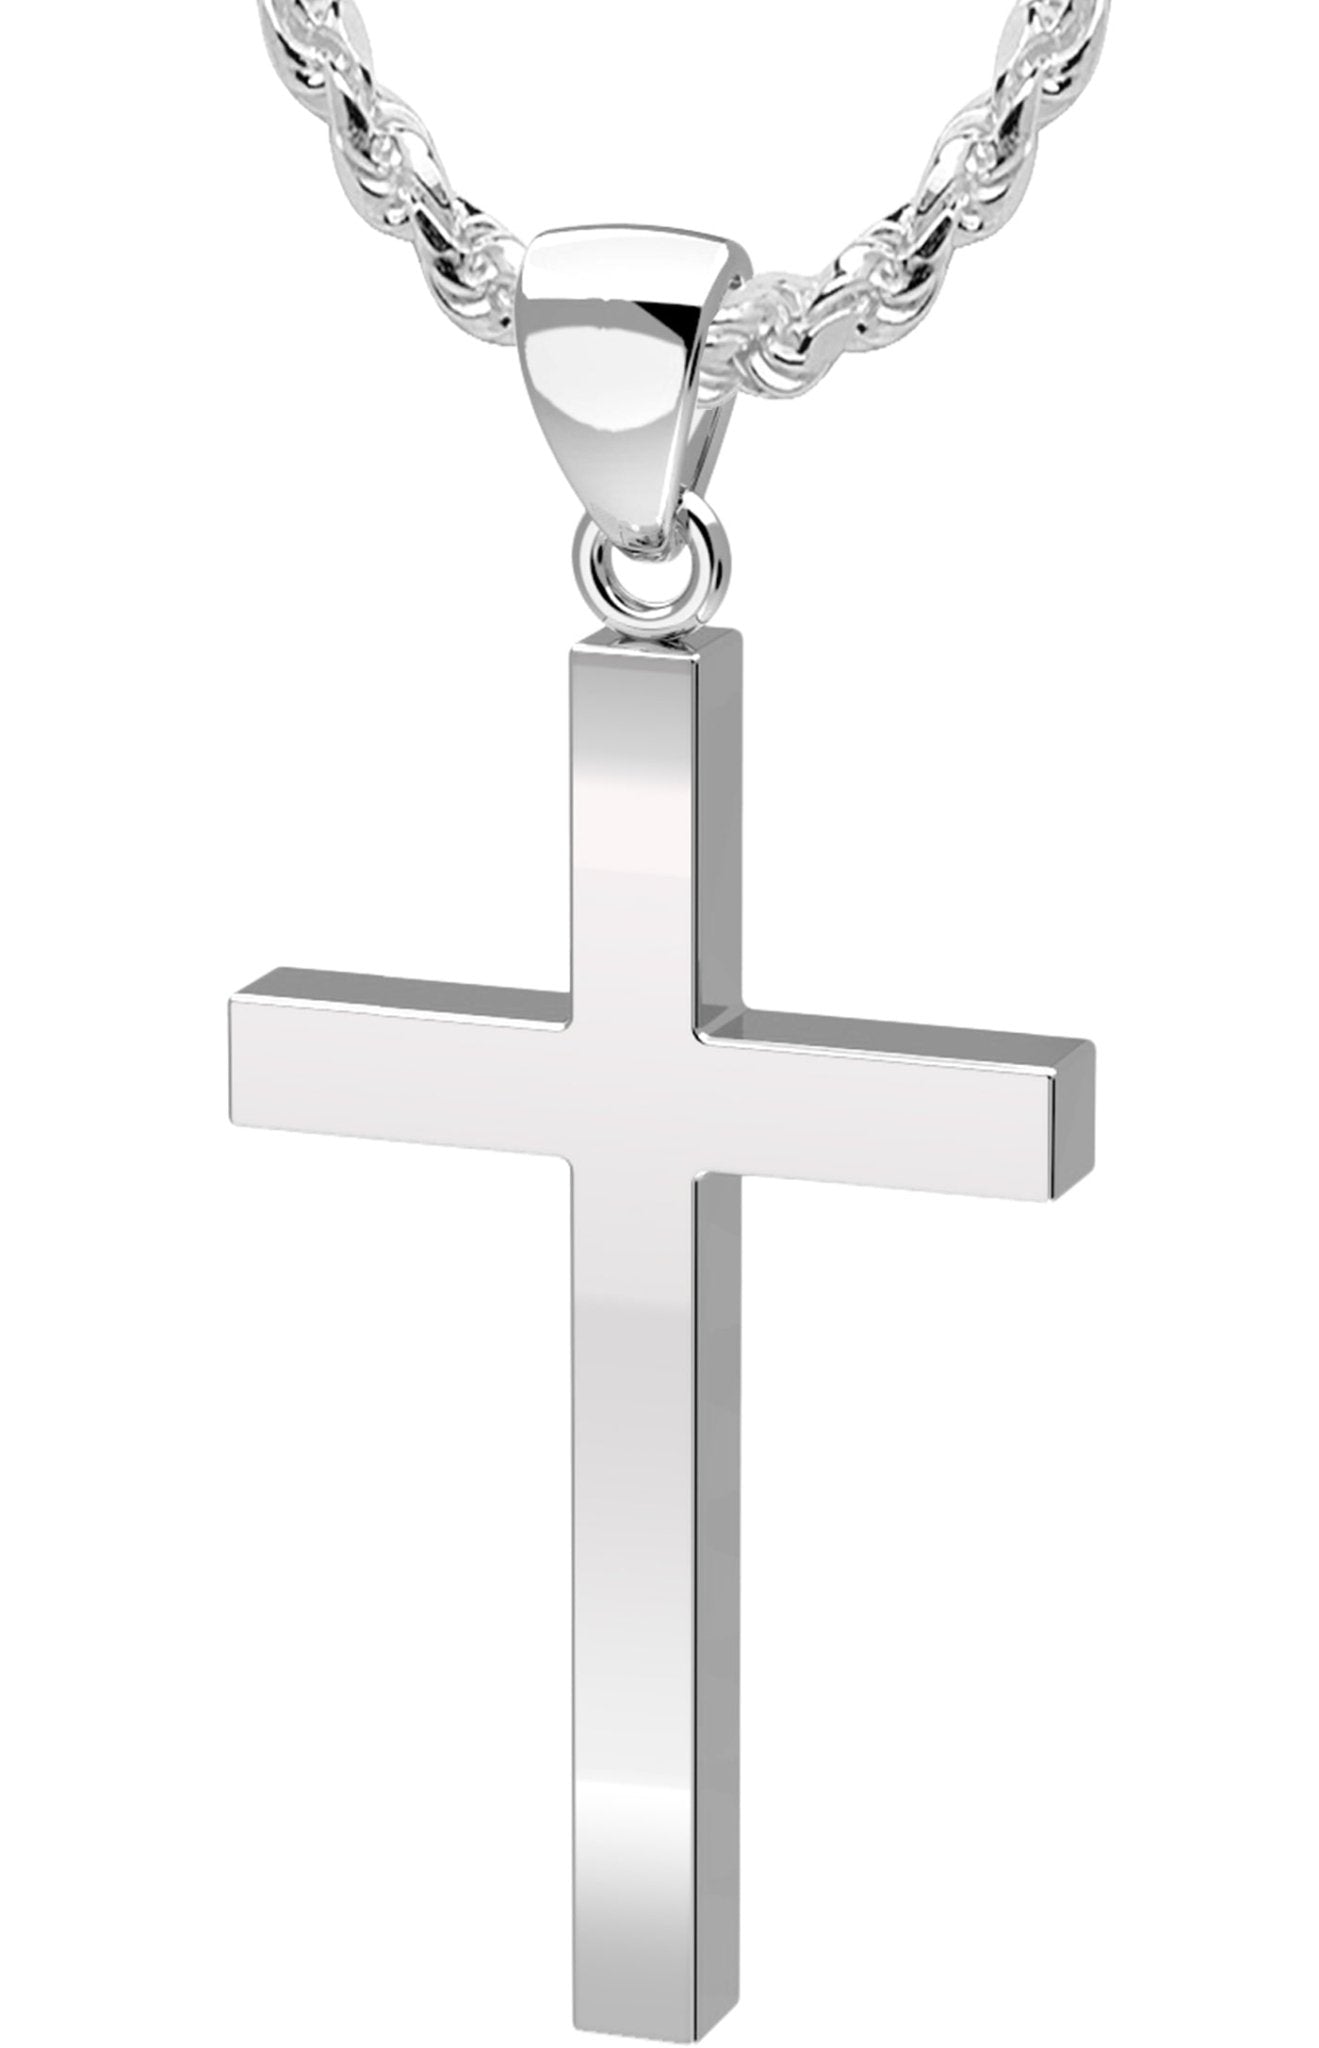 Cross Pendant Necklace - Pendant Necklace Made for Men 26in 3.2mm Rope Chain